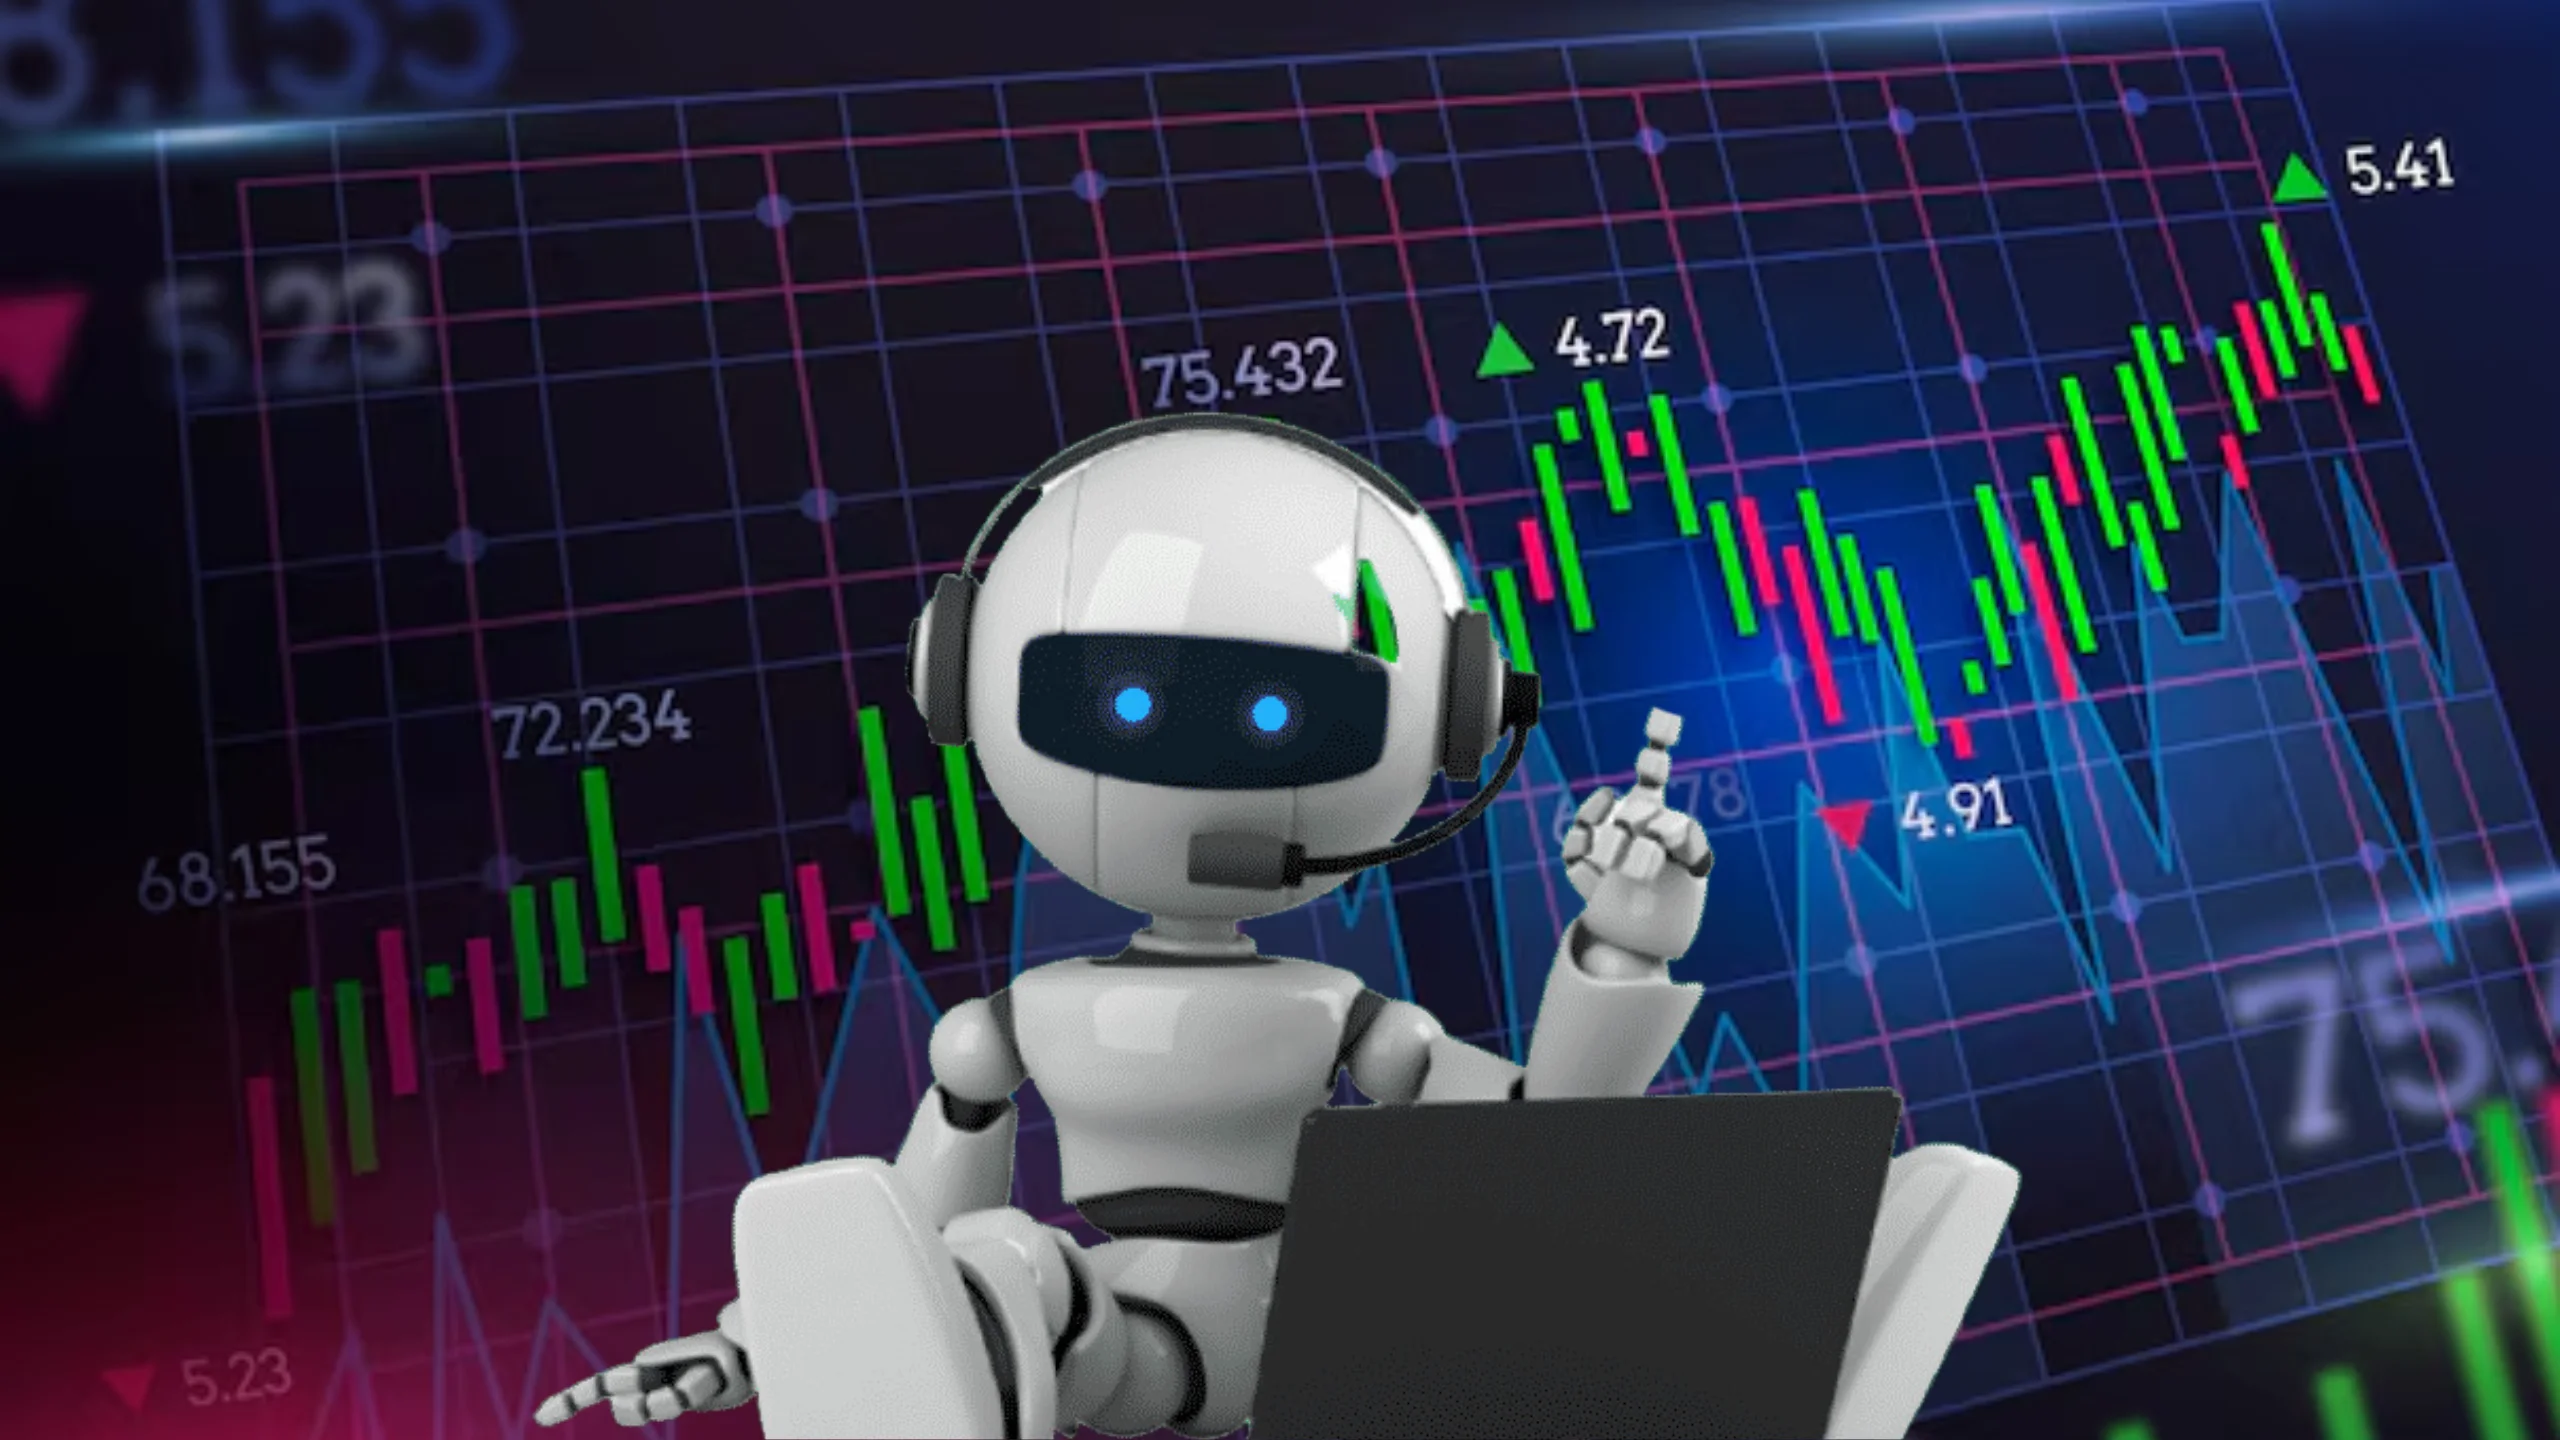 Automated Trading Bots and Trading Challenges.